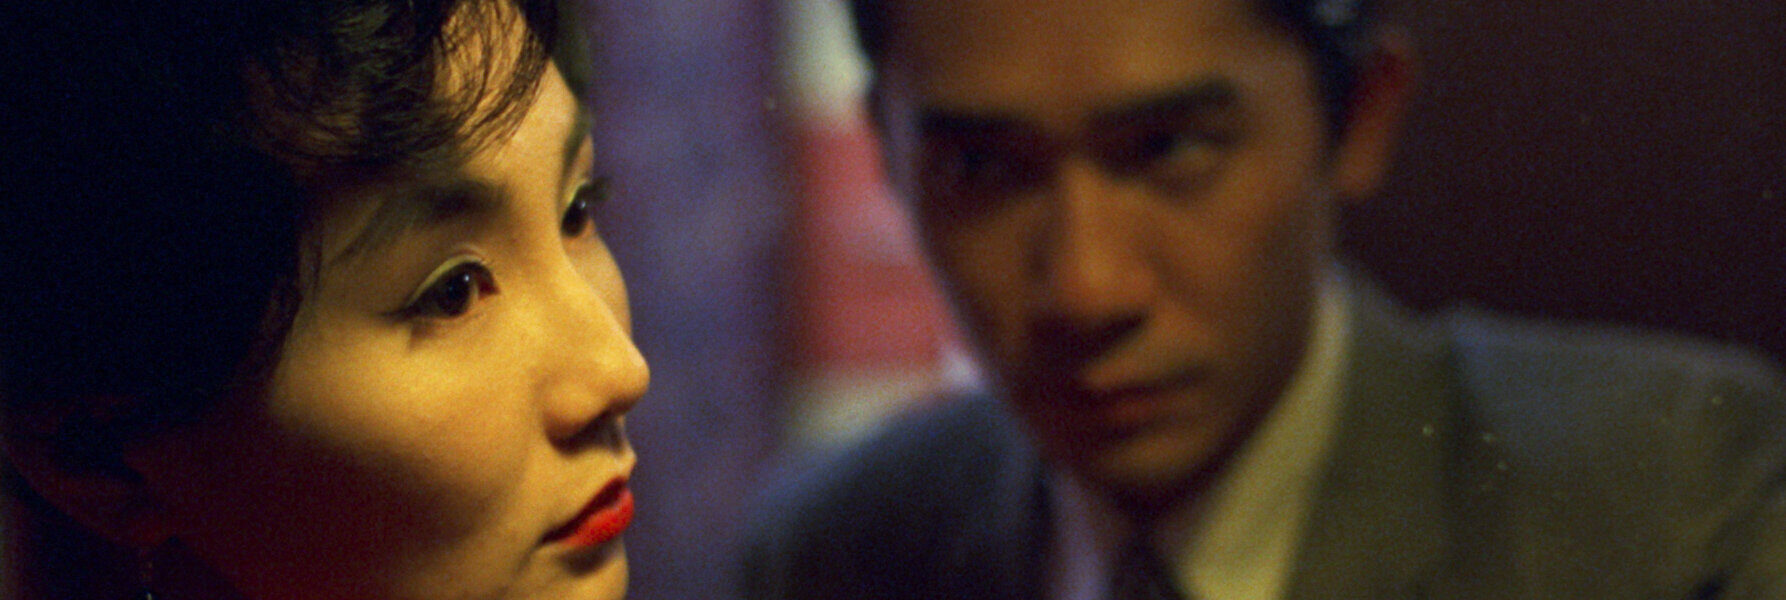 film in the mood for love